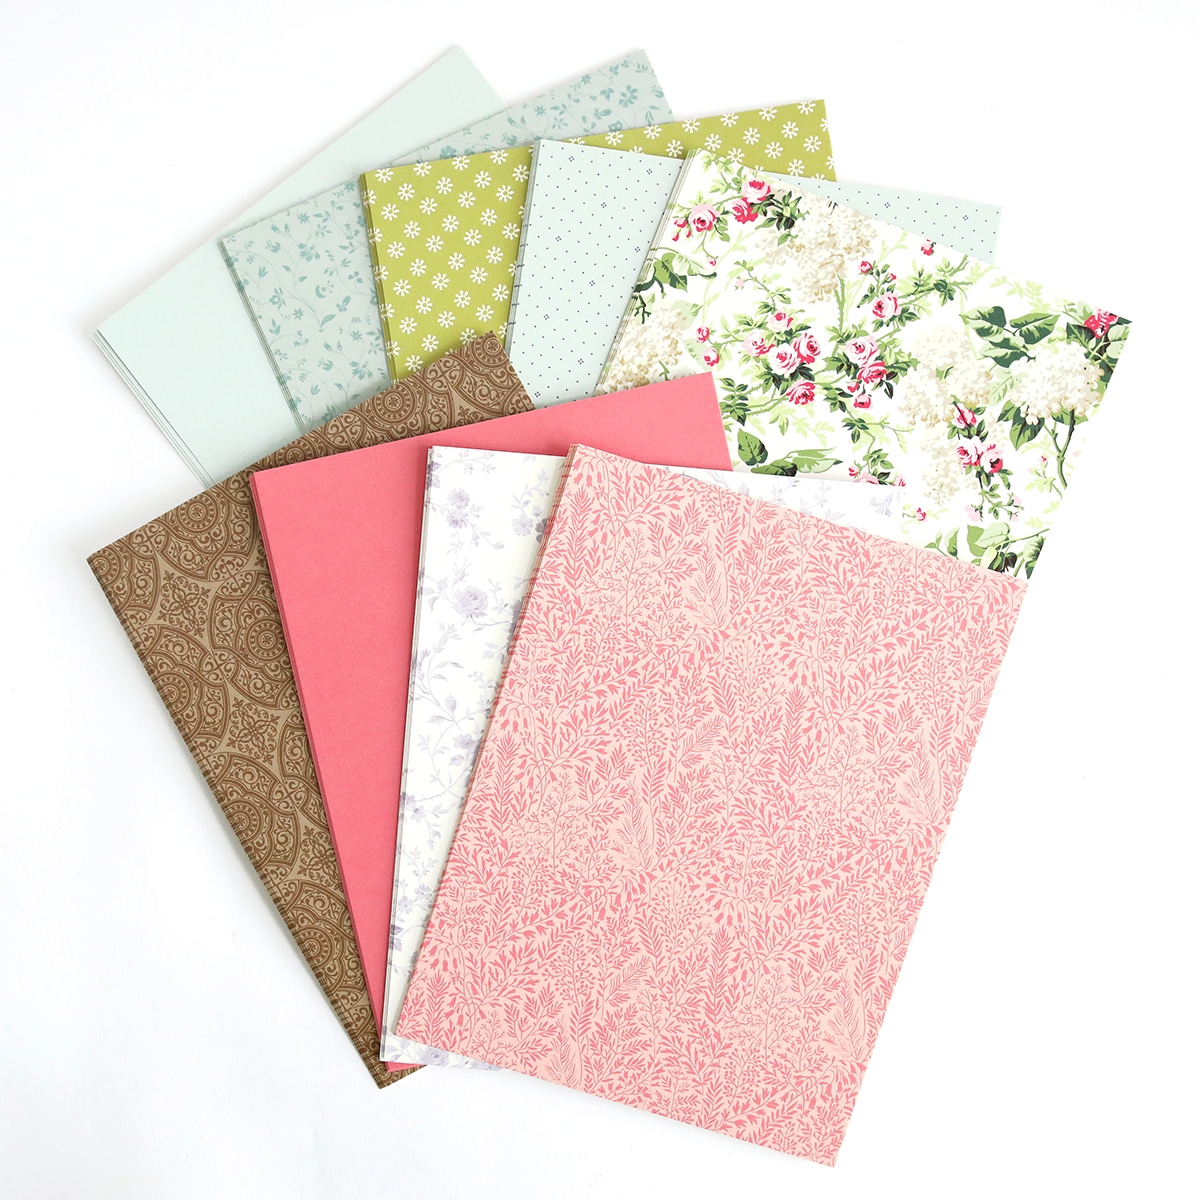 A stack of papers with floral designs on them.